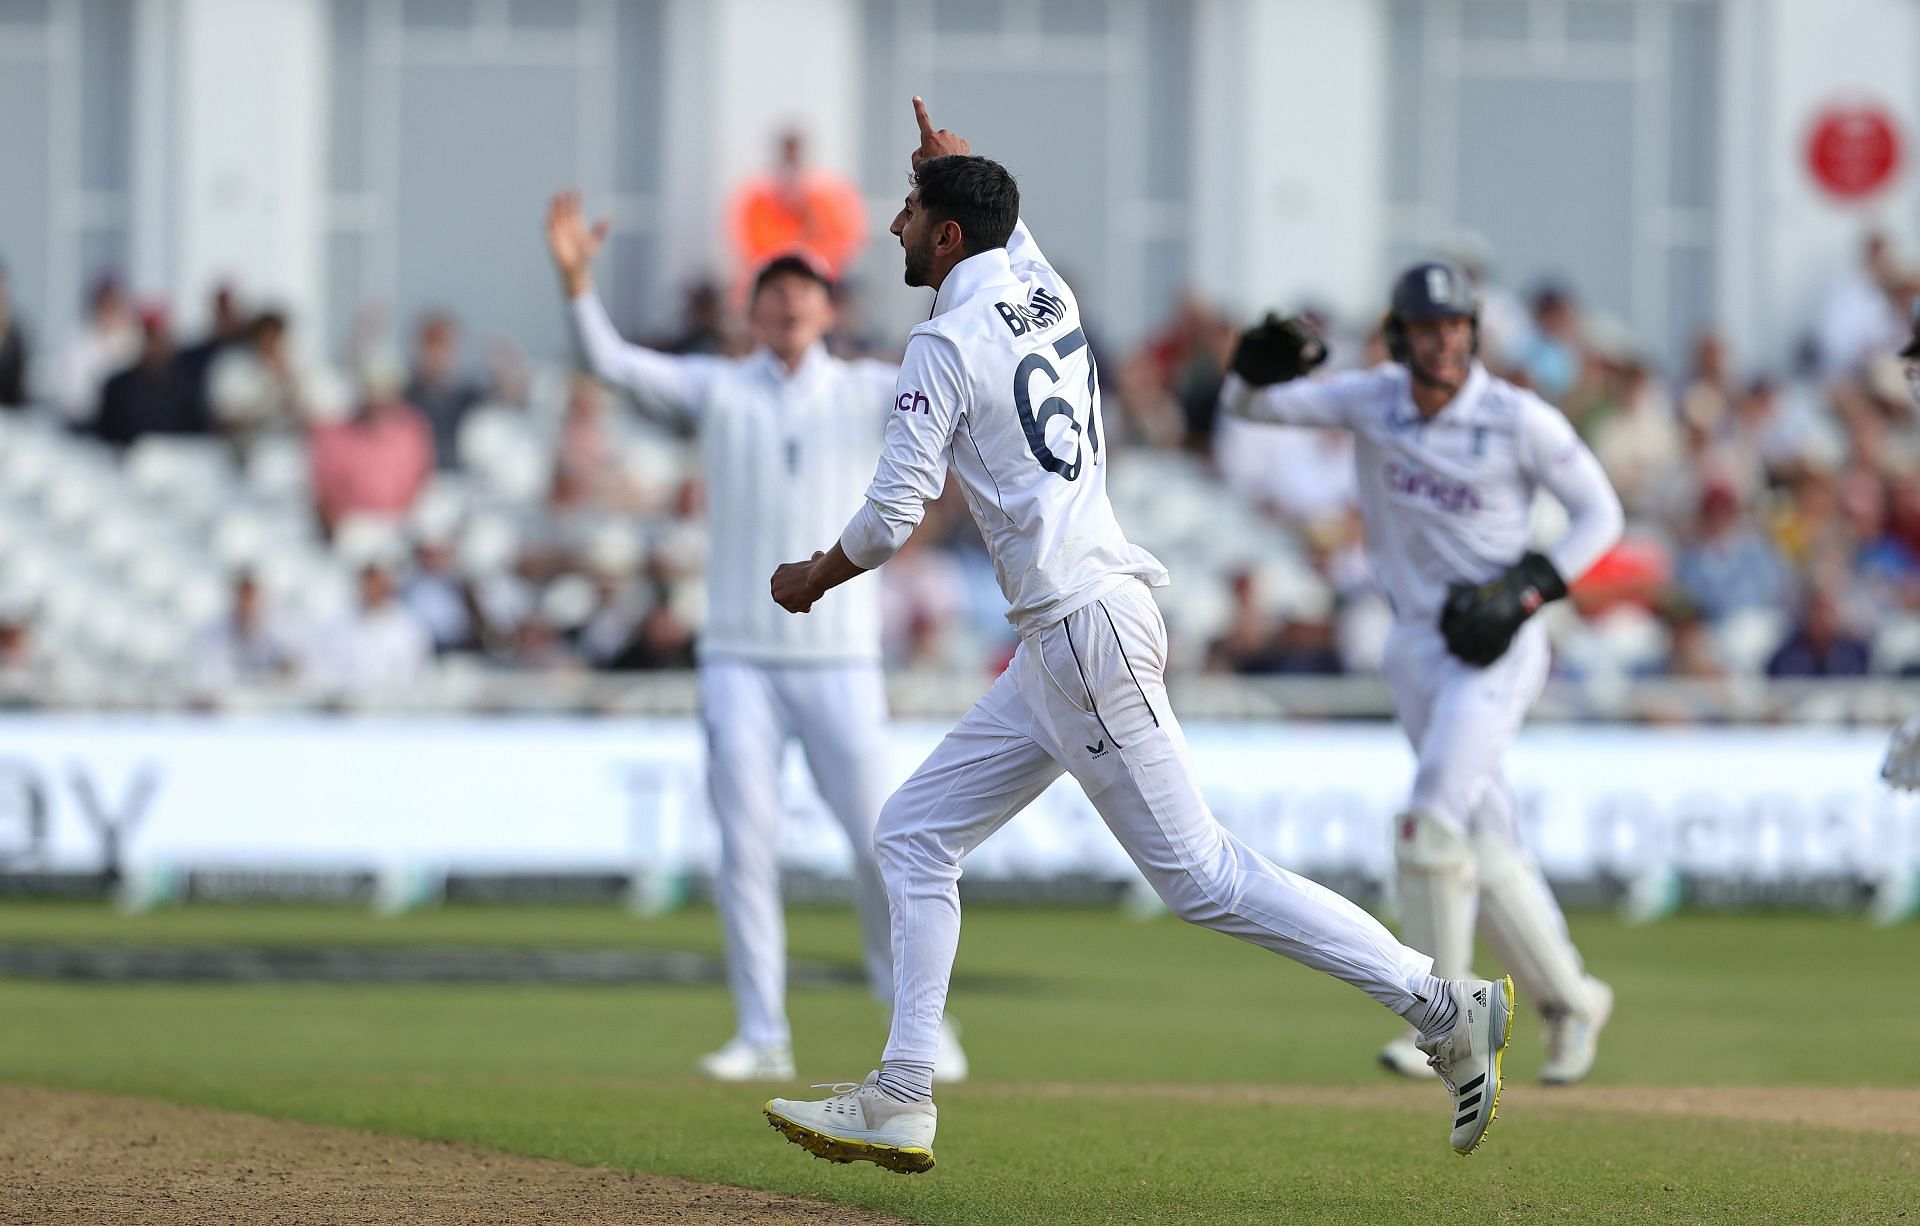 [Watch] Shoaib Bashir knocks over Jason Holder and Shamar Joseph to complete 5-fer and bowl England to victory in Trent Bridge Test